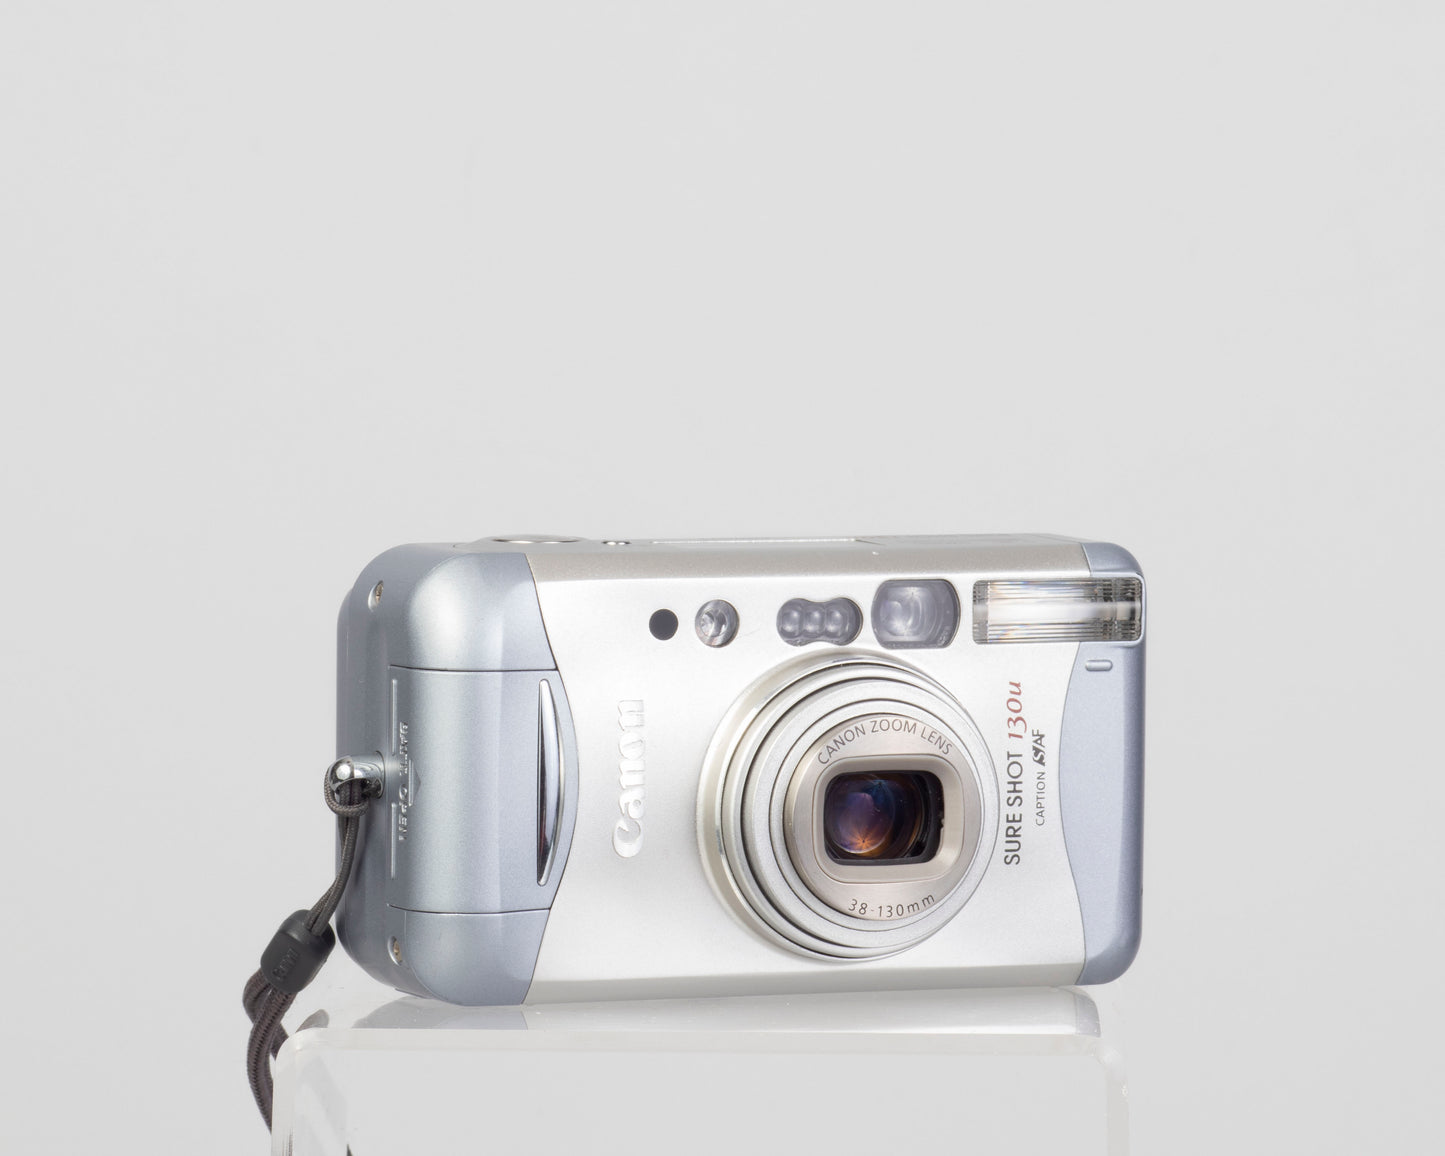 The Canon Sure Shot 130u is an ultra-compact 35mm point-and-shoot from 2002